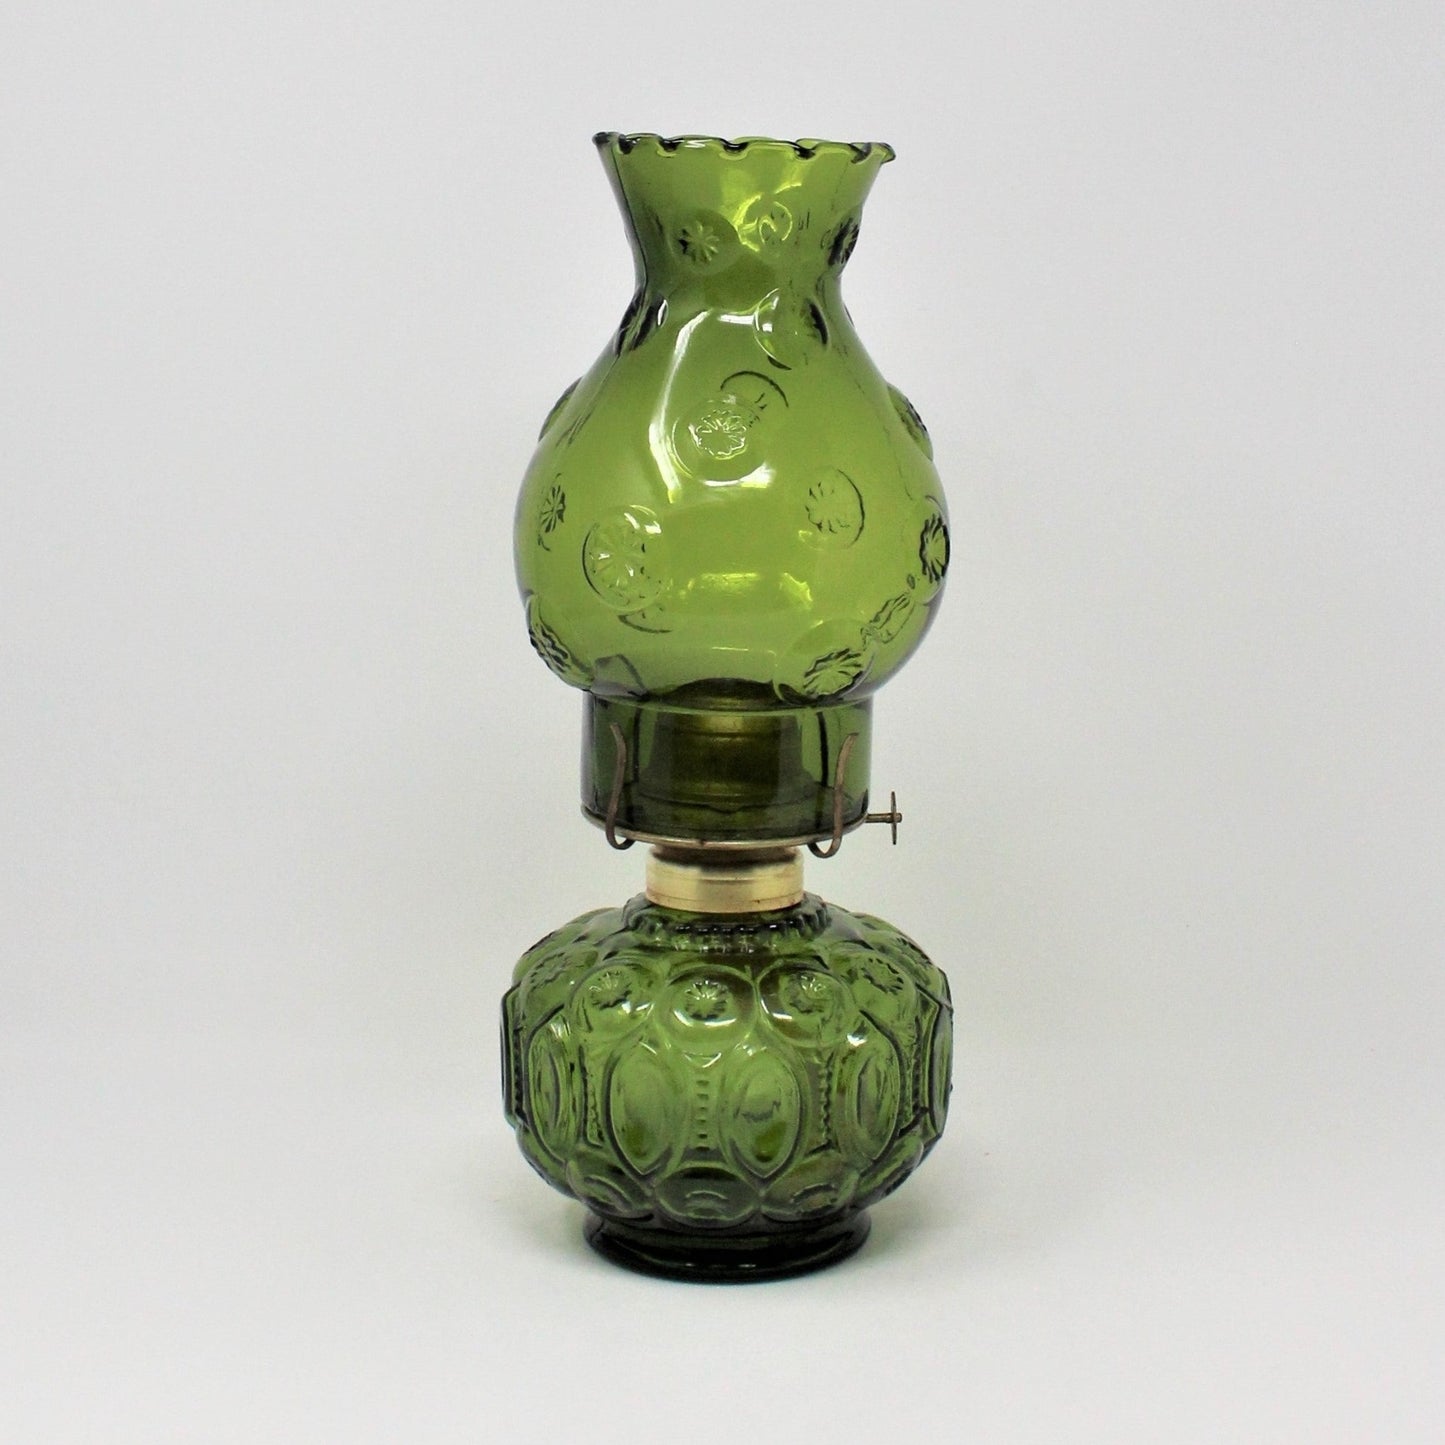 Oil Lamp, LE Smith, Moon and Stars Green Glass, P&A Burner, Vintage